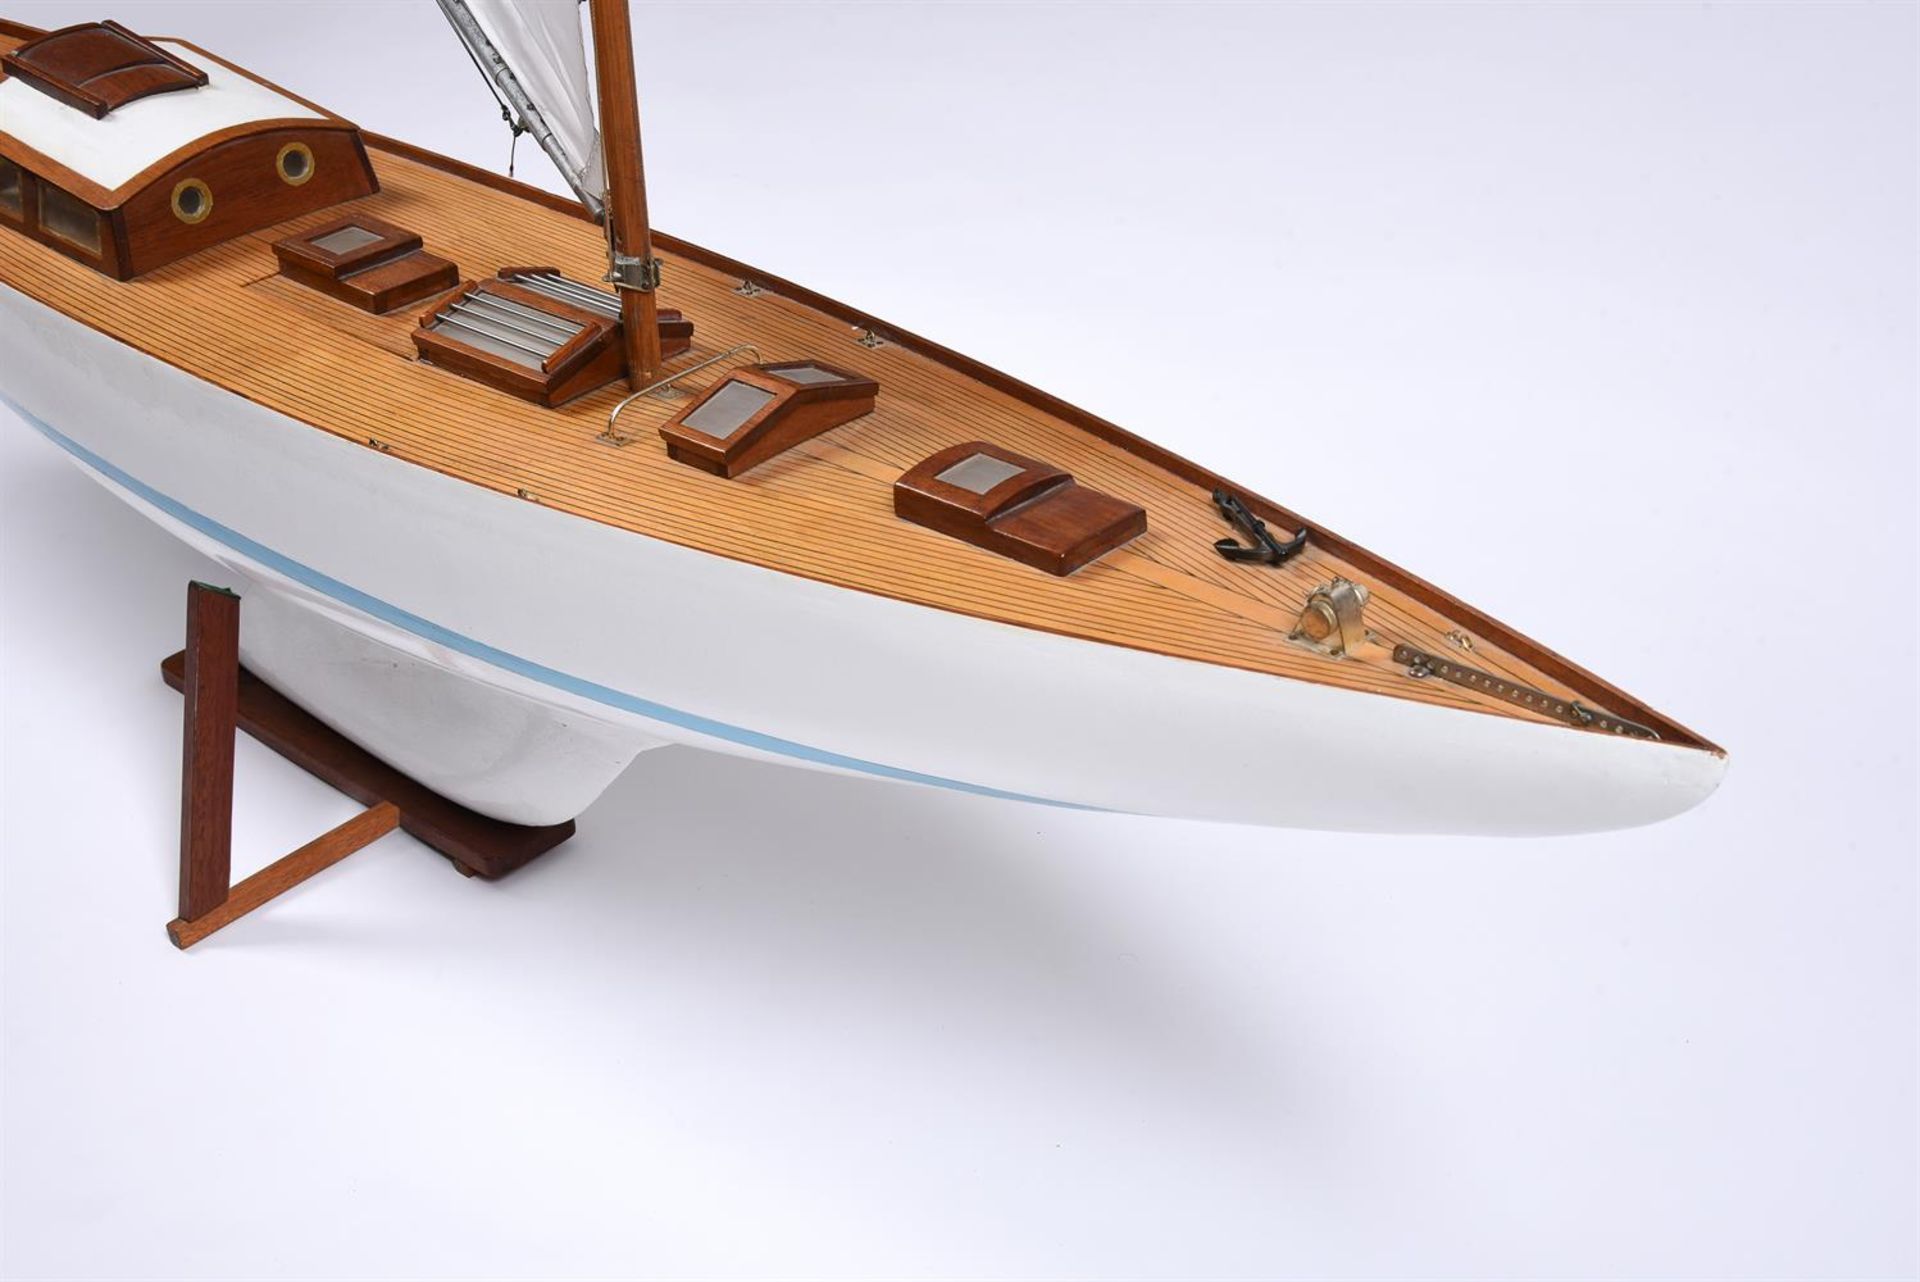 A MODERN PAINTED AND VARNISHED WOOD MODEL OF A POND YACHTThe mast and sail above the white hull and - Image 3 of 5